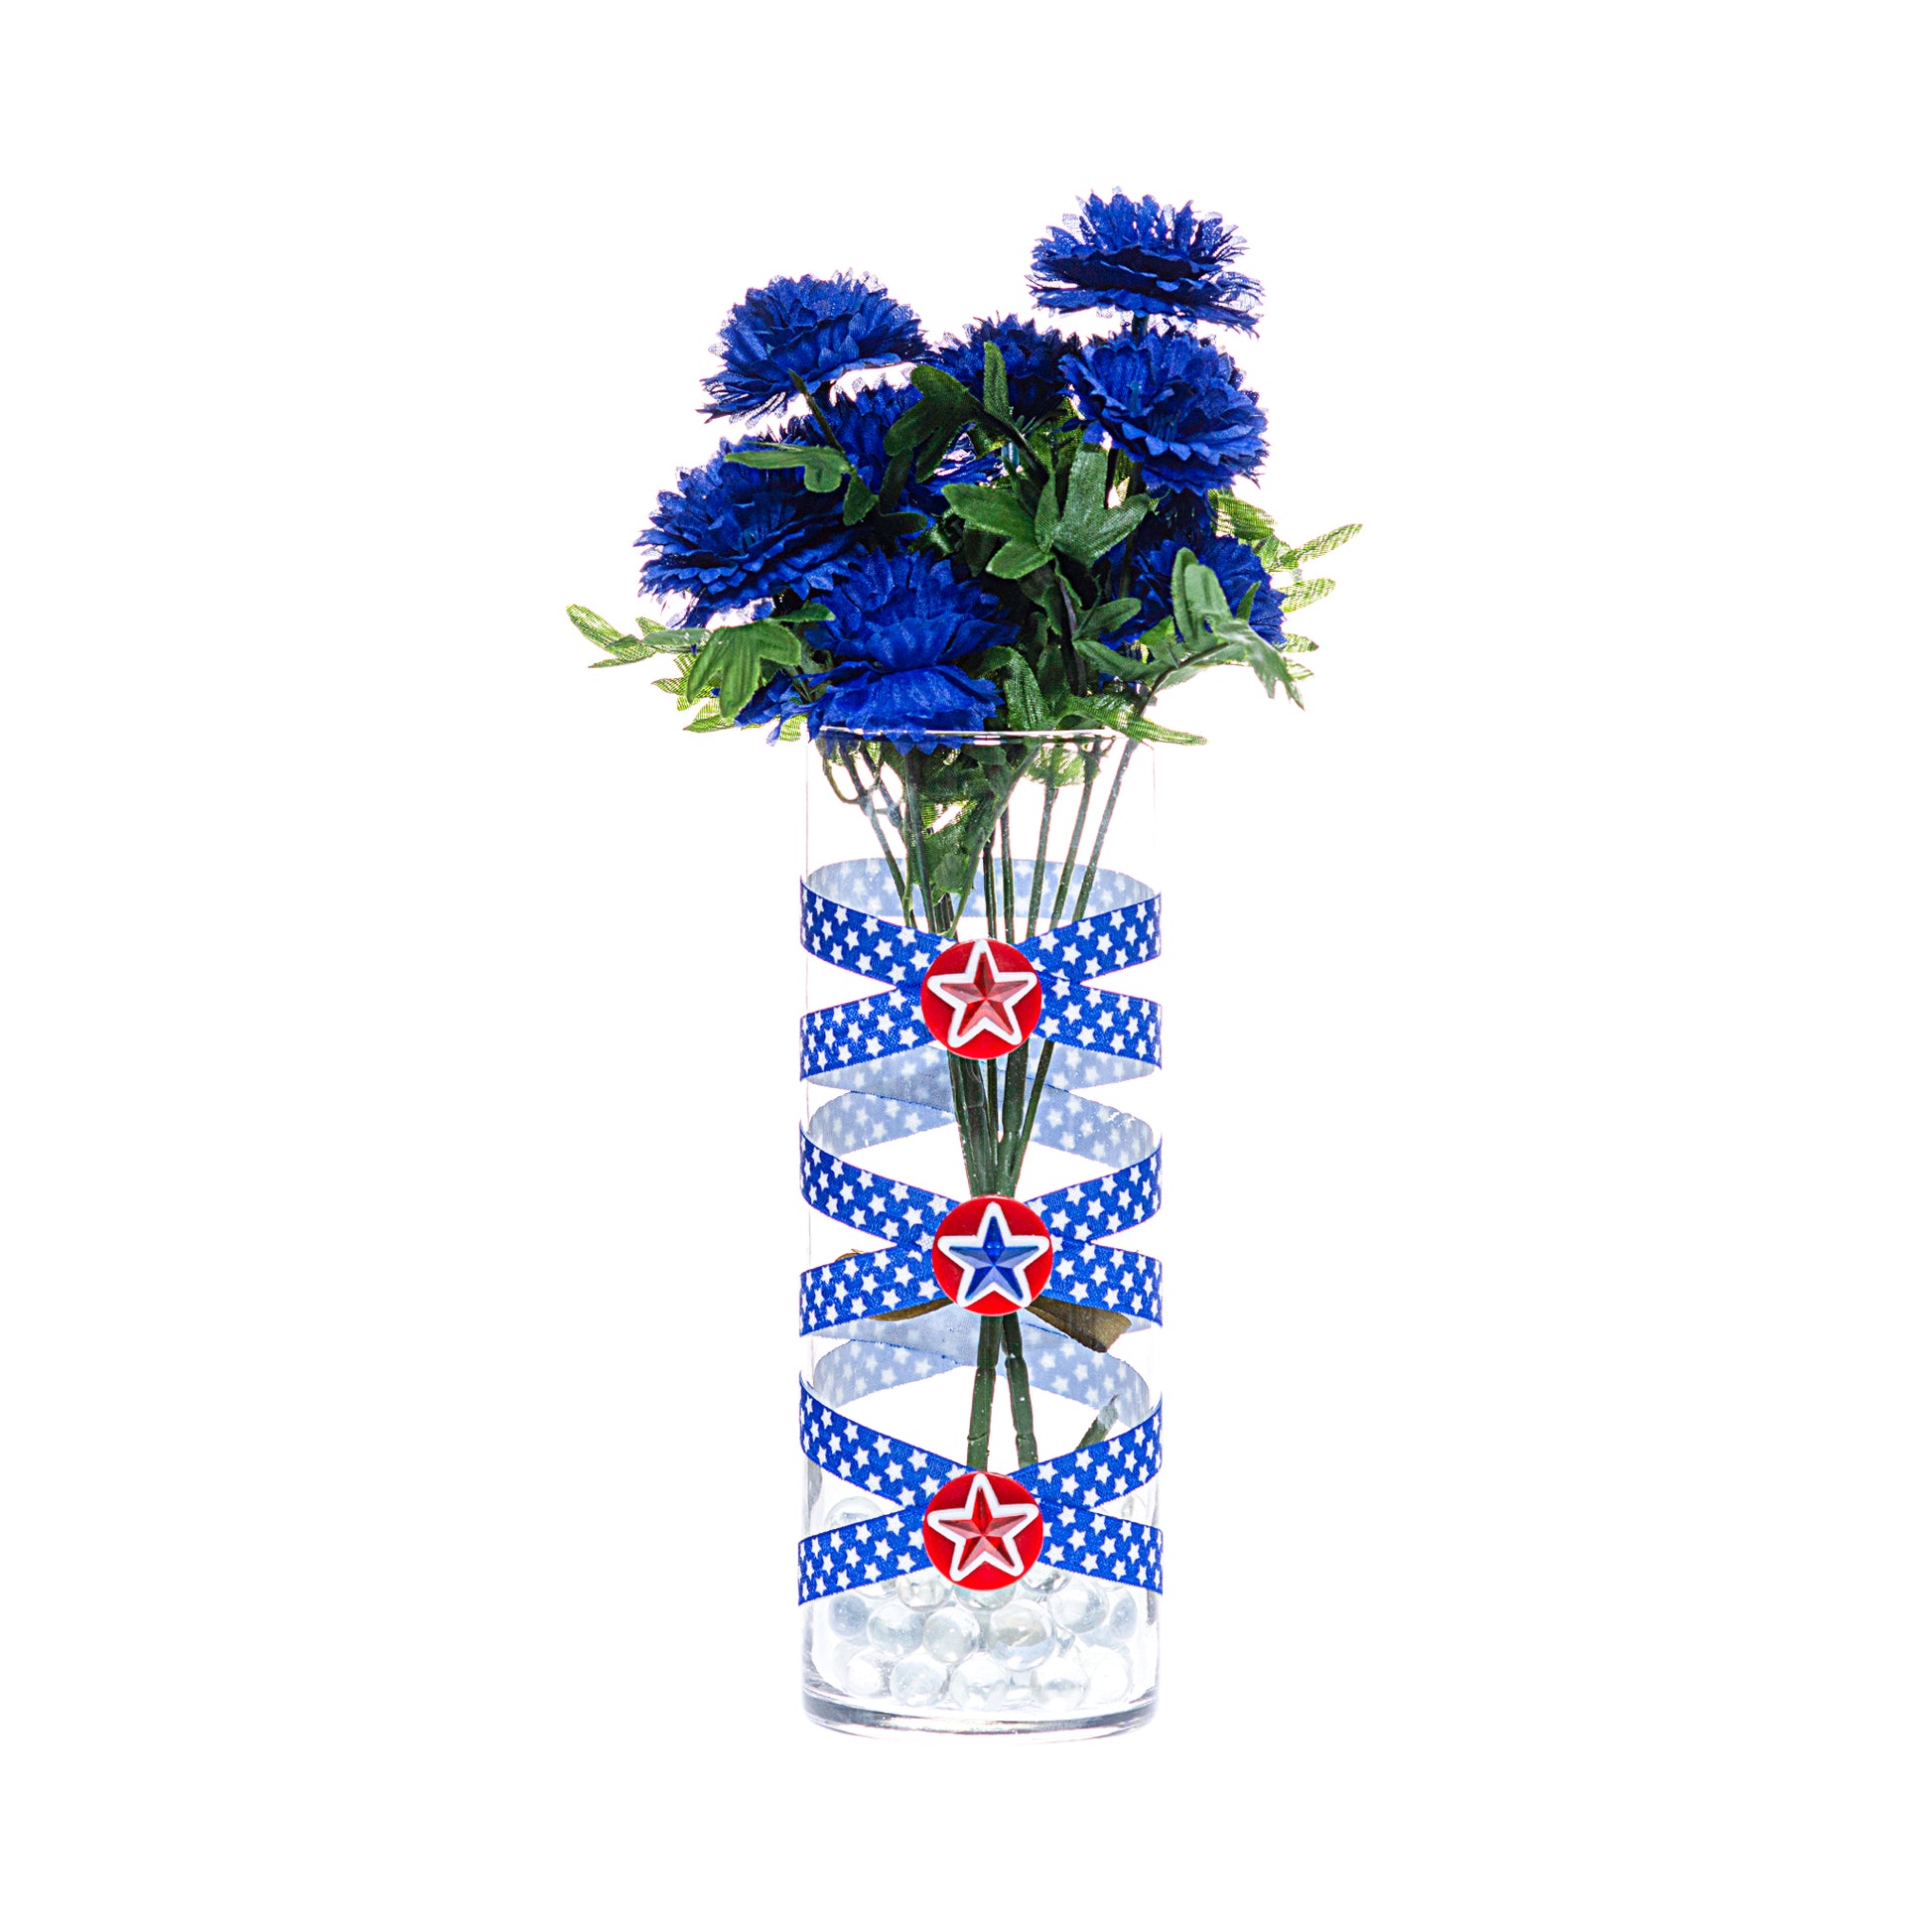 Front of Glass Wrappings' 10" bud vase wrapped in blue with white stars elastic, decorated with 3 patriotic stars. It is filled with blue flowers.